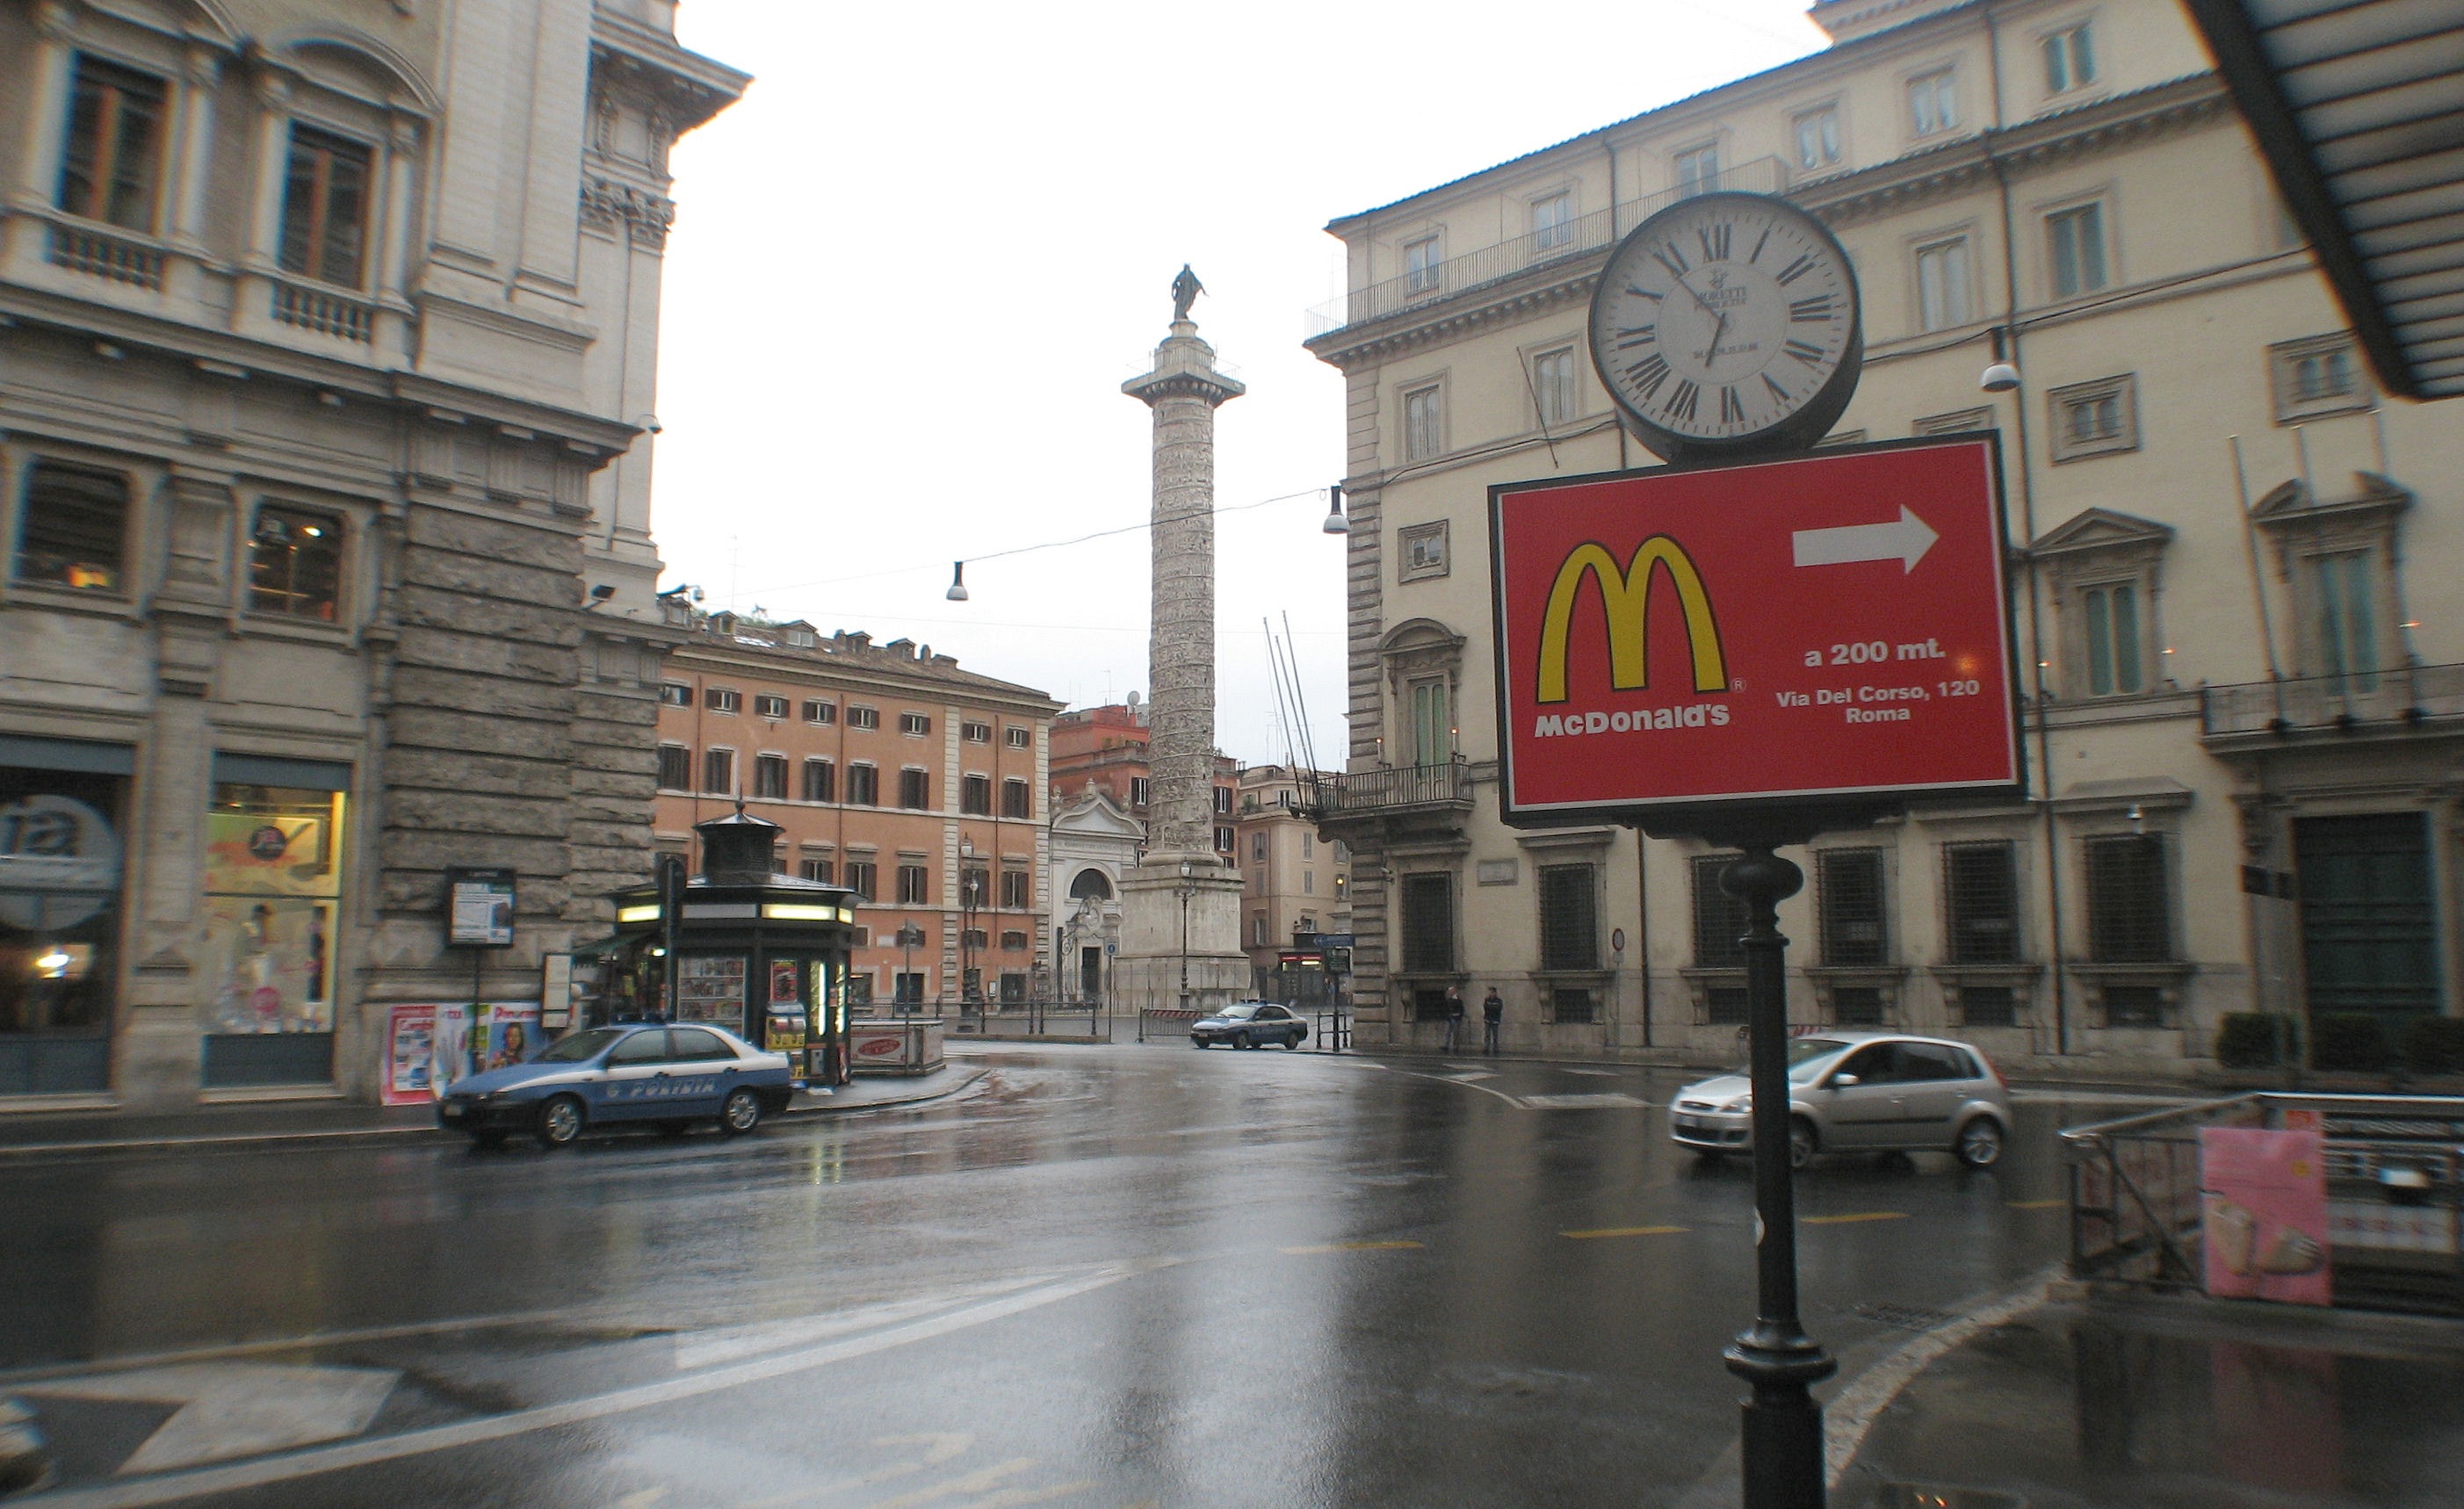 Plans to open McDonald’s in Vatican city spark outrage